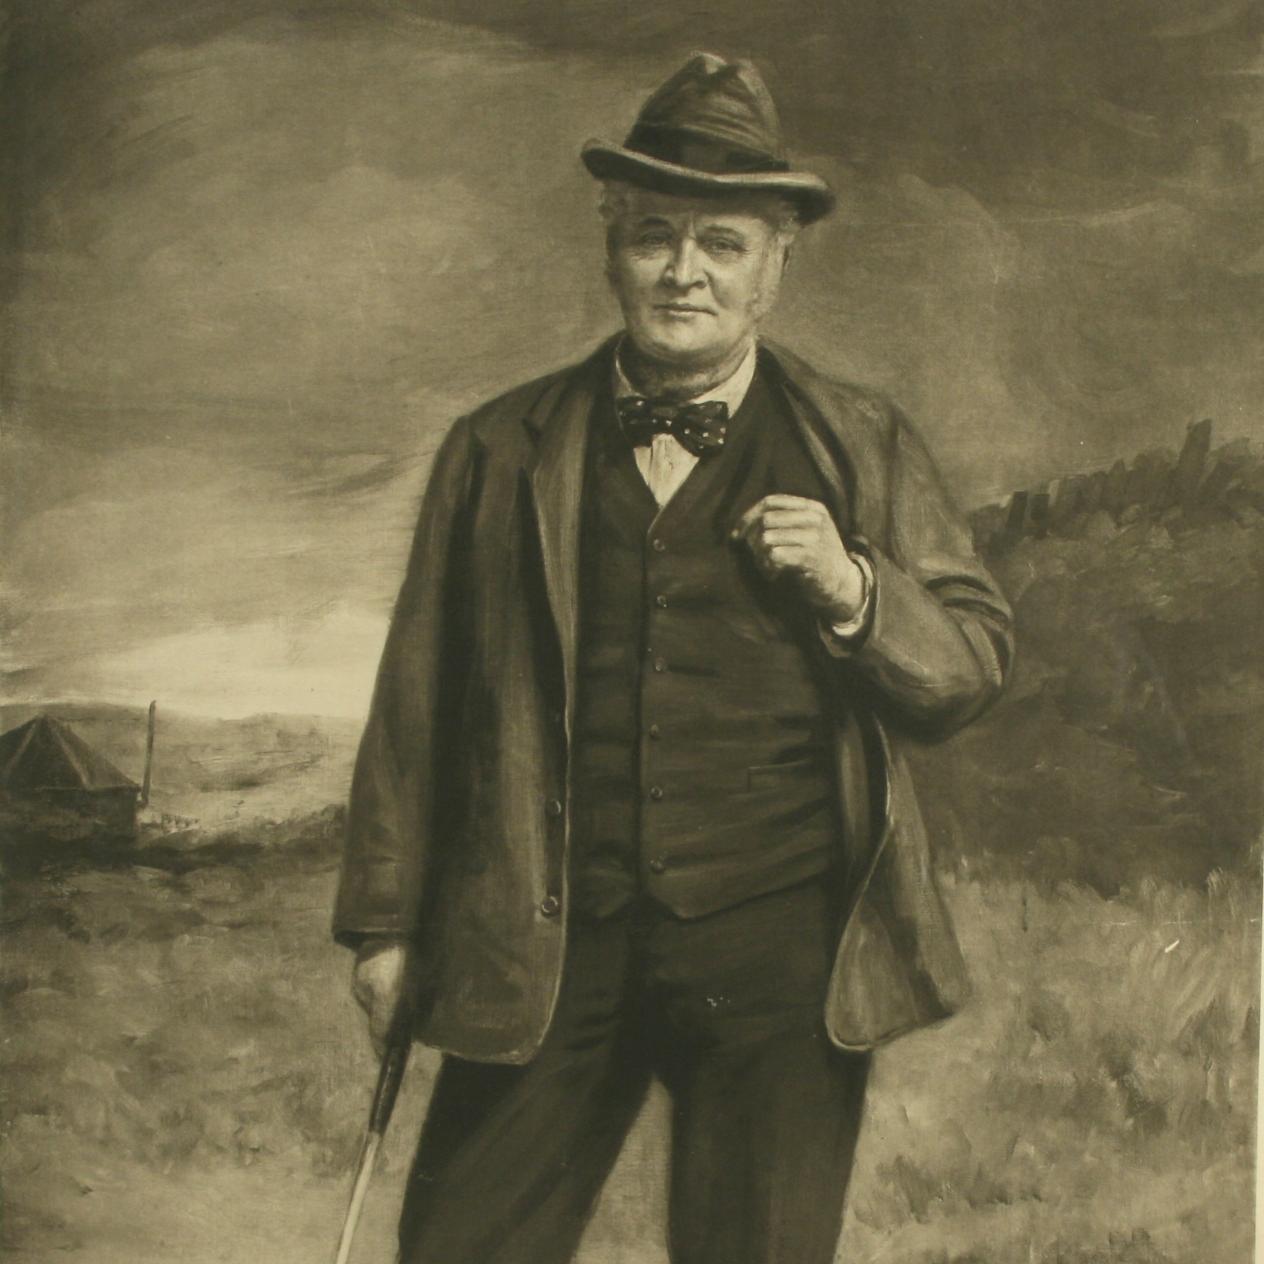 Charlie Hunter, golf club maker, Prestwick. Robert Cree Crawford,
A fine photogravure by Annan & Sons, after the painting by R.C. Crawford, of the famous Prestwick professional and club maker 'Charlie Hunter'. The picture shows Hunter standing on